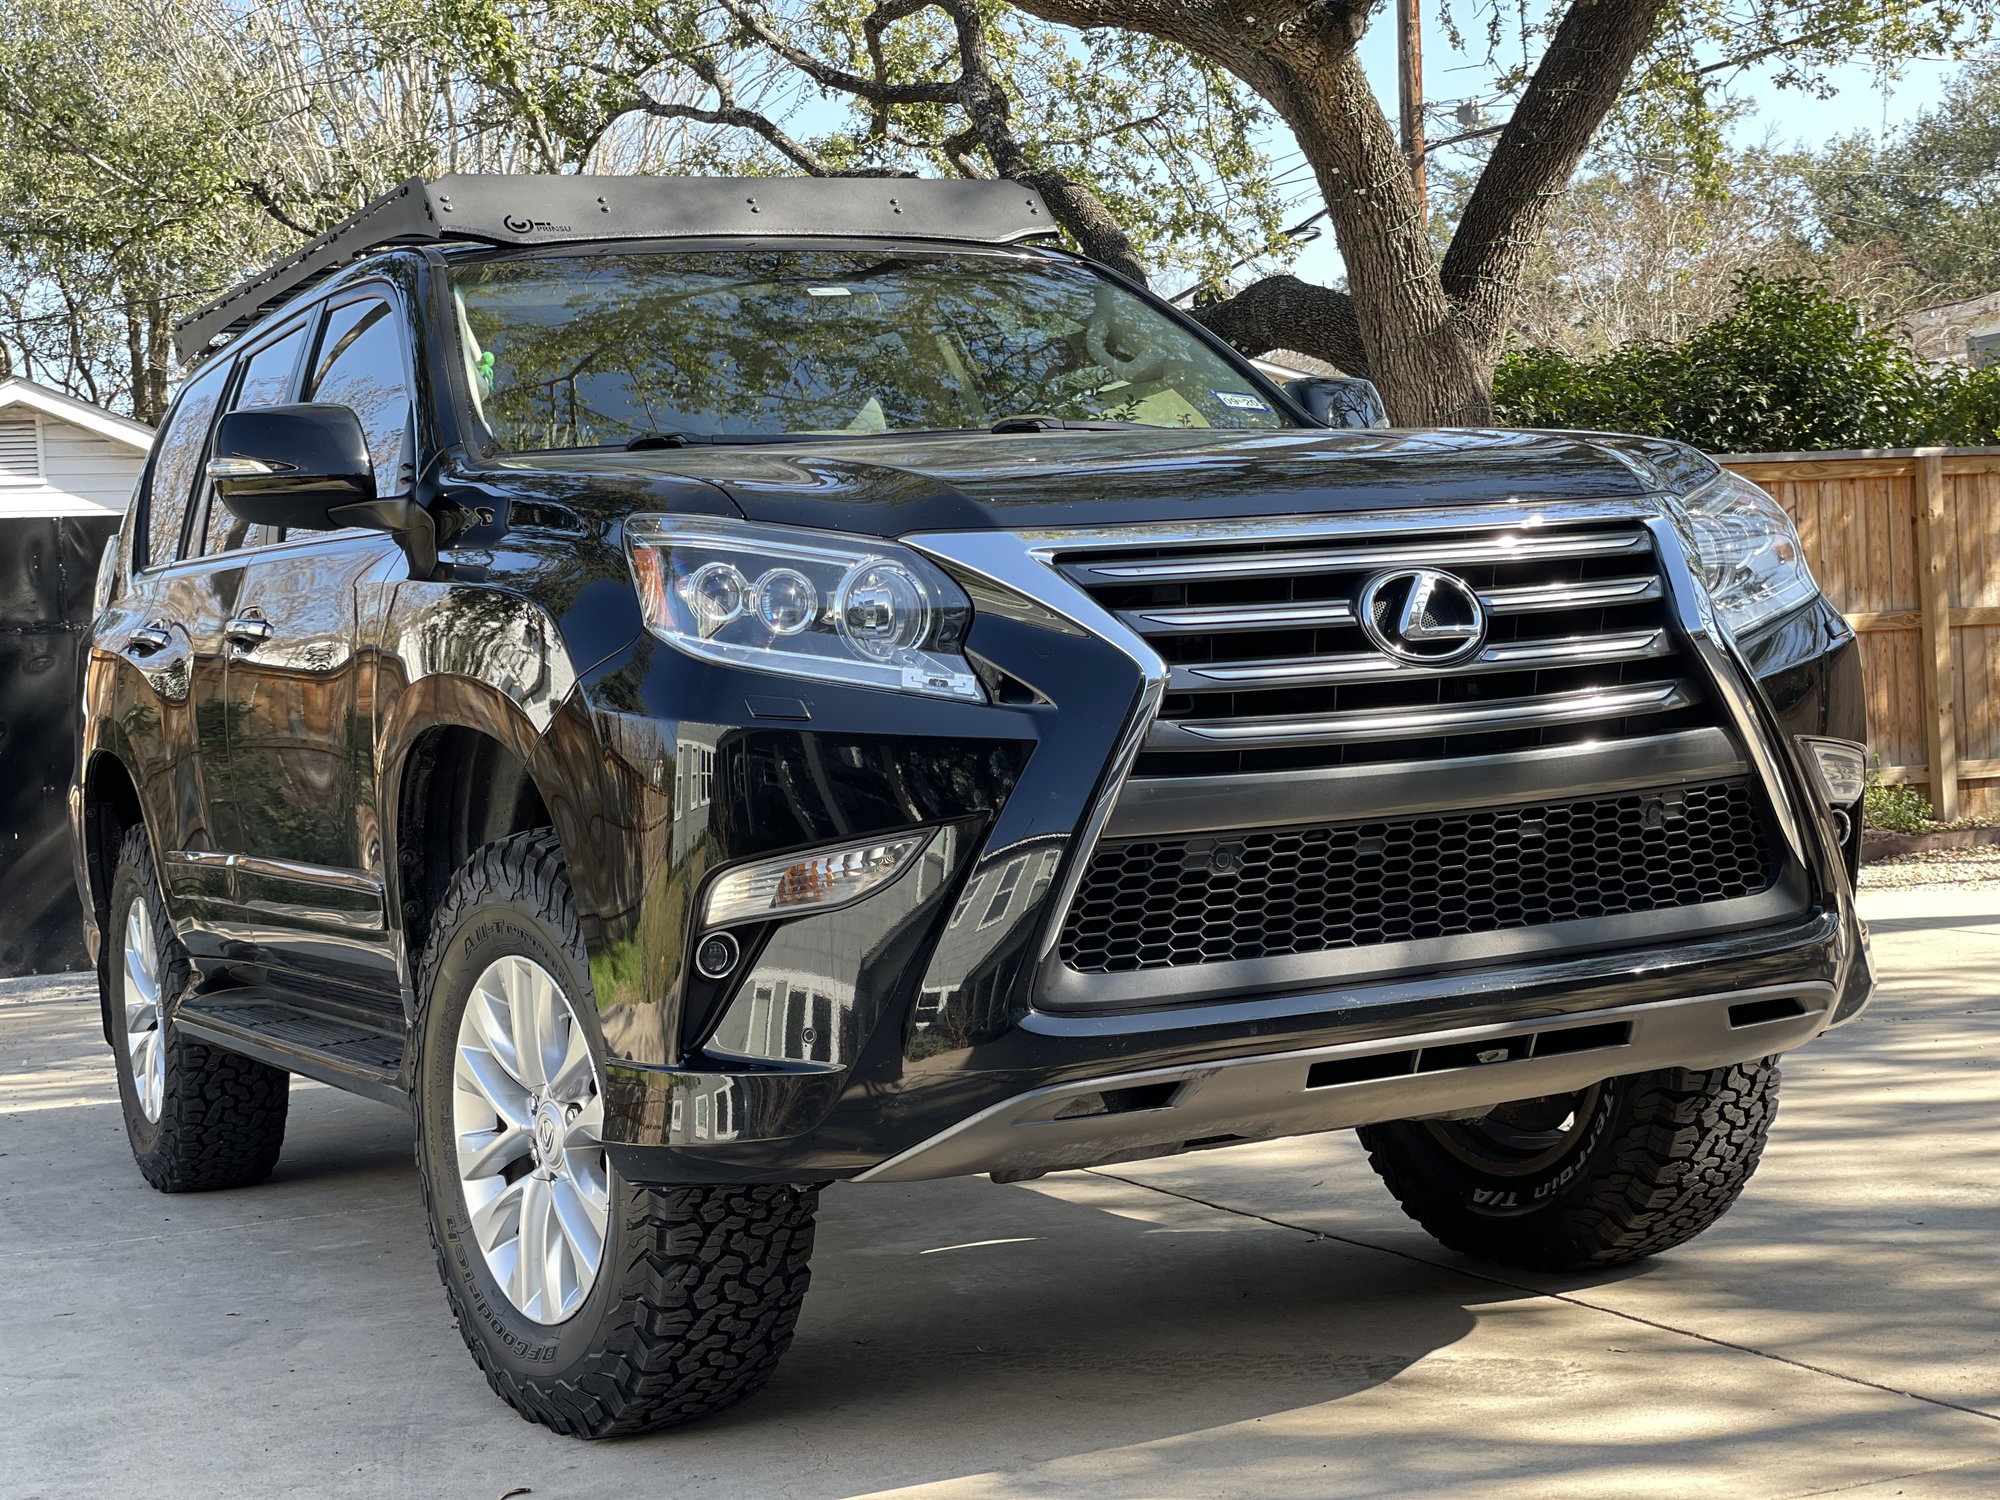 Lifted GX460 thread - Page 9 - ClubLexus - Lexus Forum Discussion